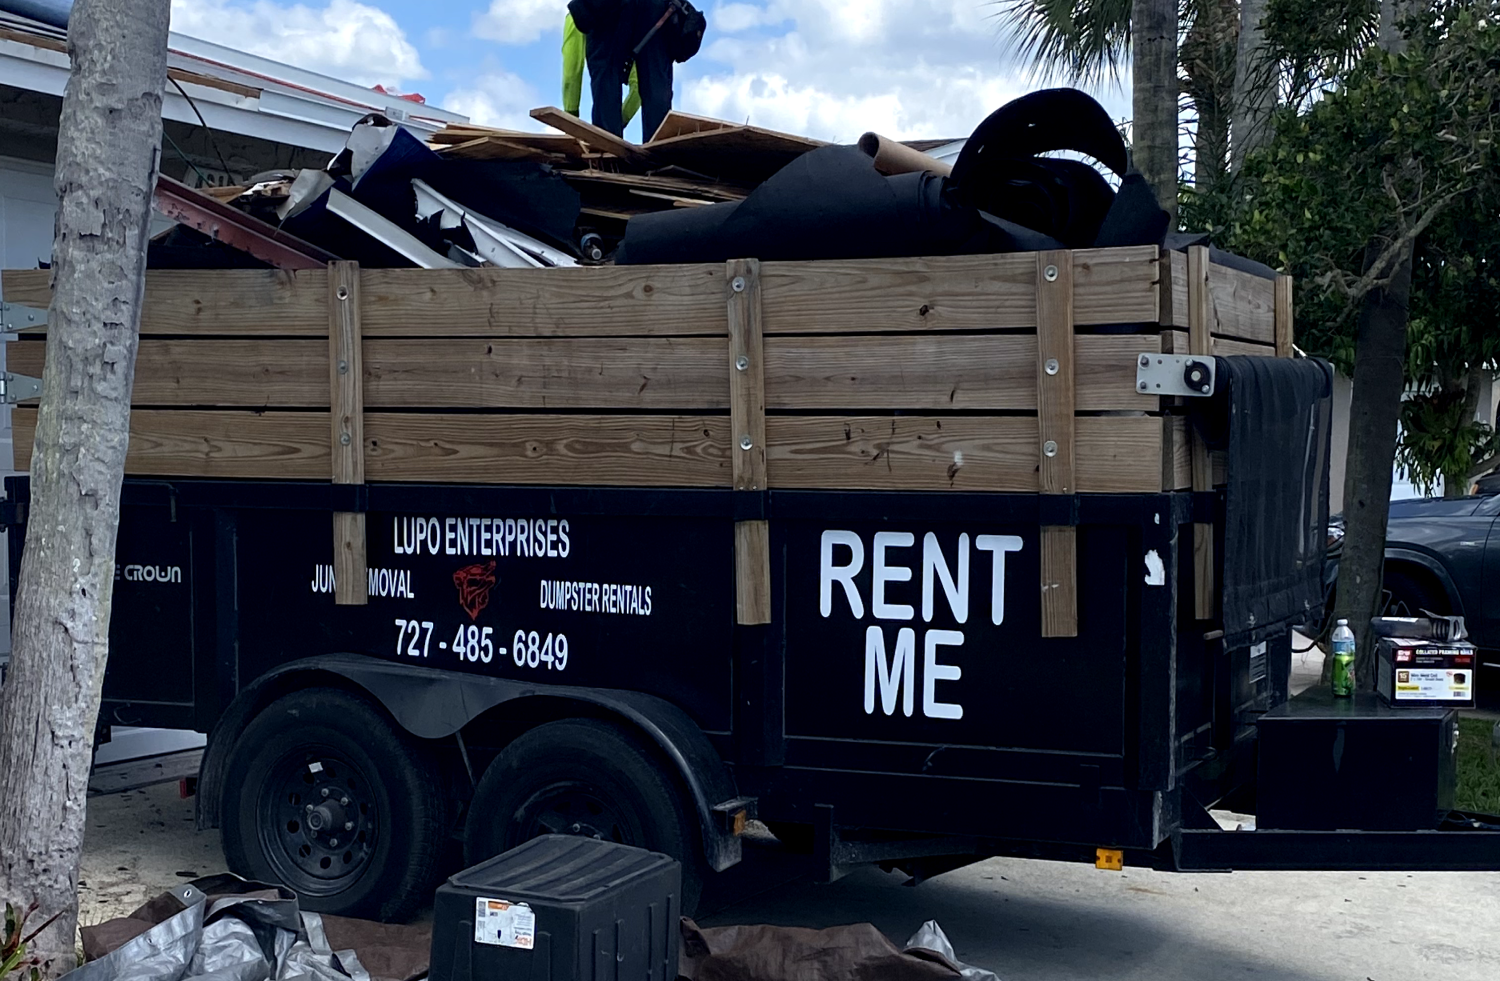 Top dumpster rental service in Pinellas County